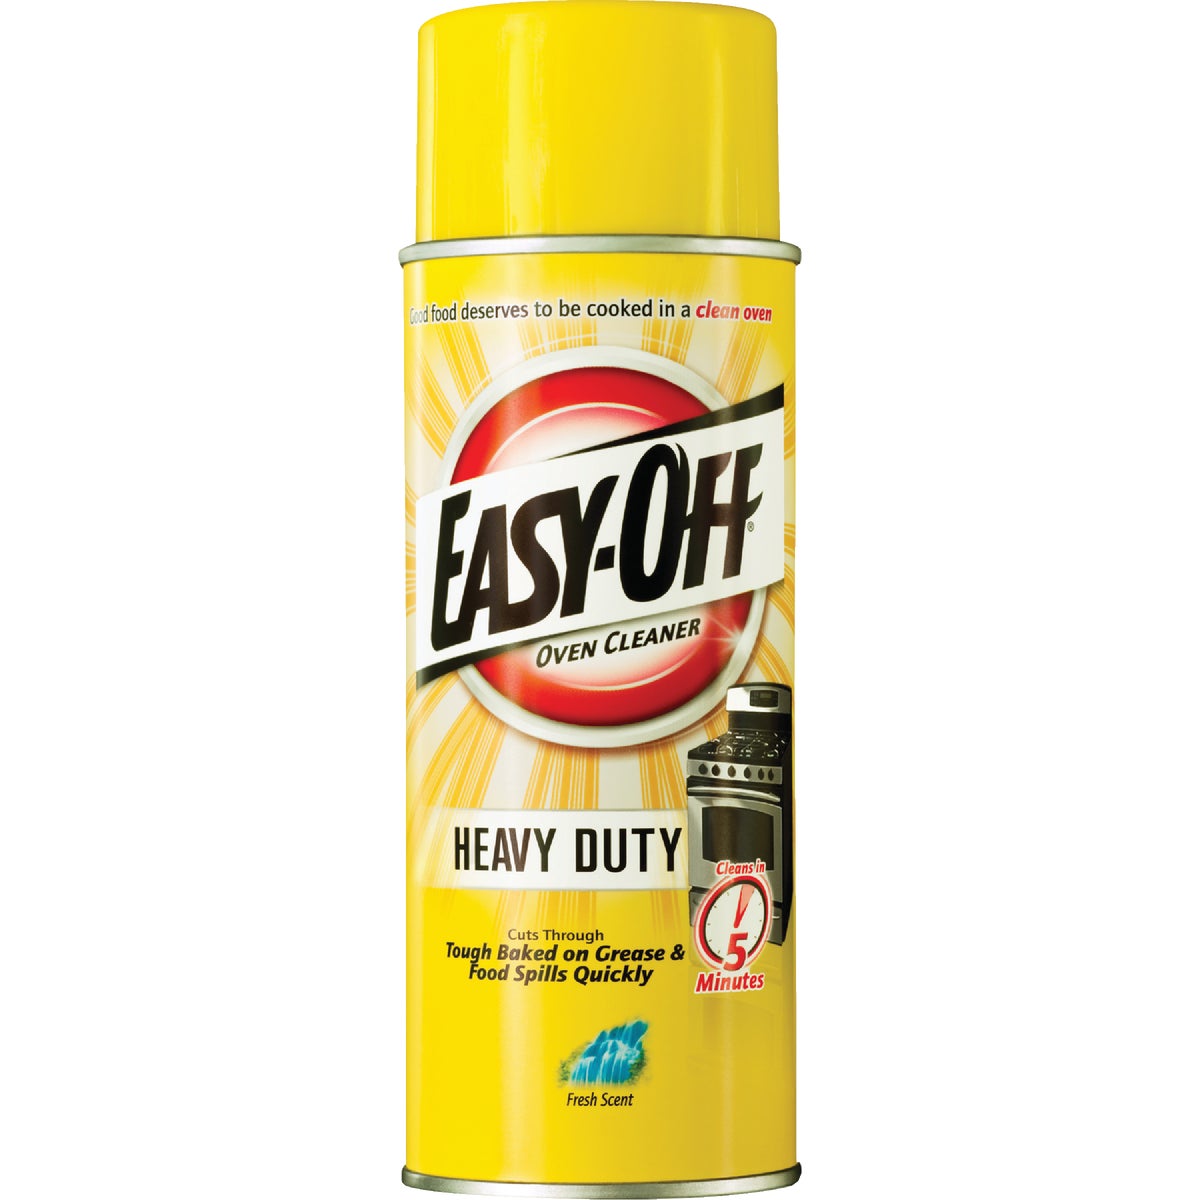 Easy-Off 14.5 Oz. Oven Cleaner